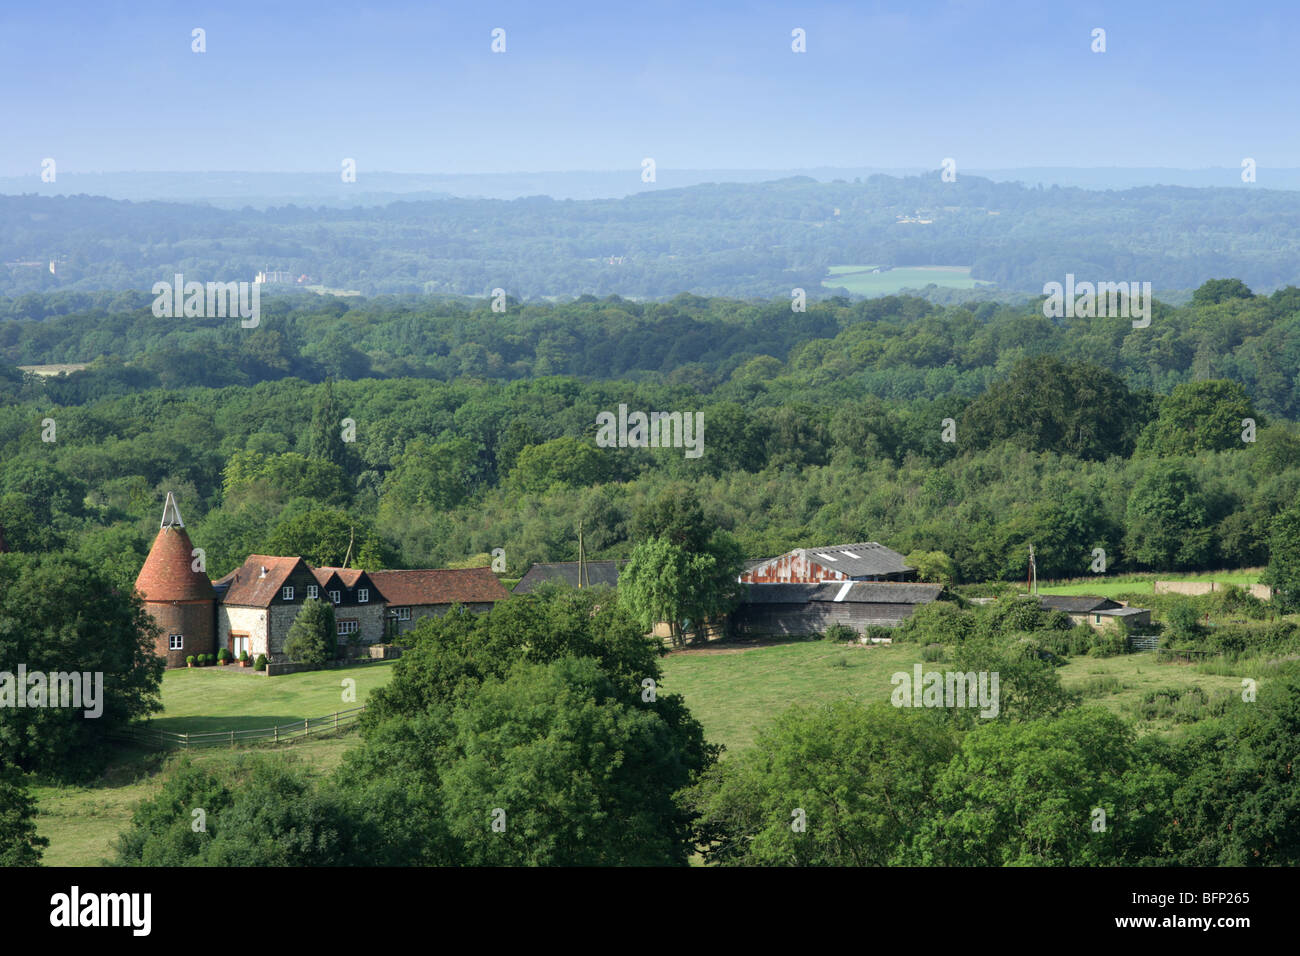 Distant view of oast house in Kent weald, taken from road Stock Photo